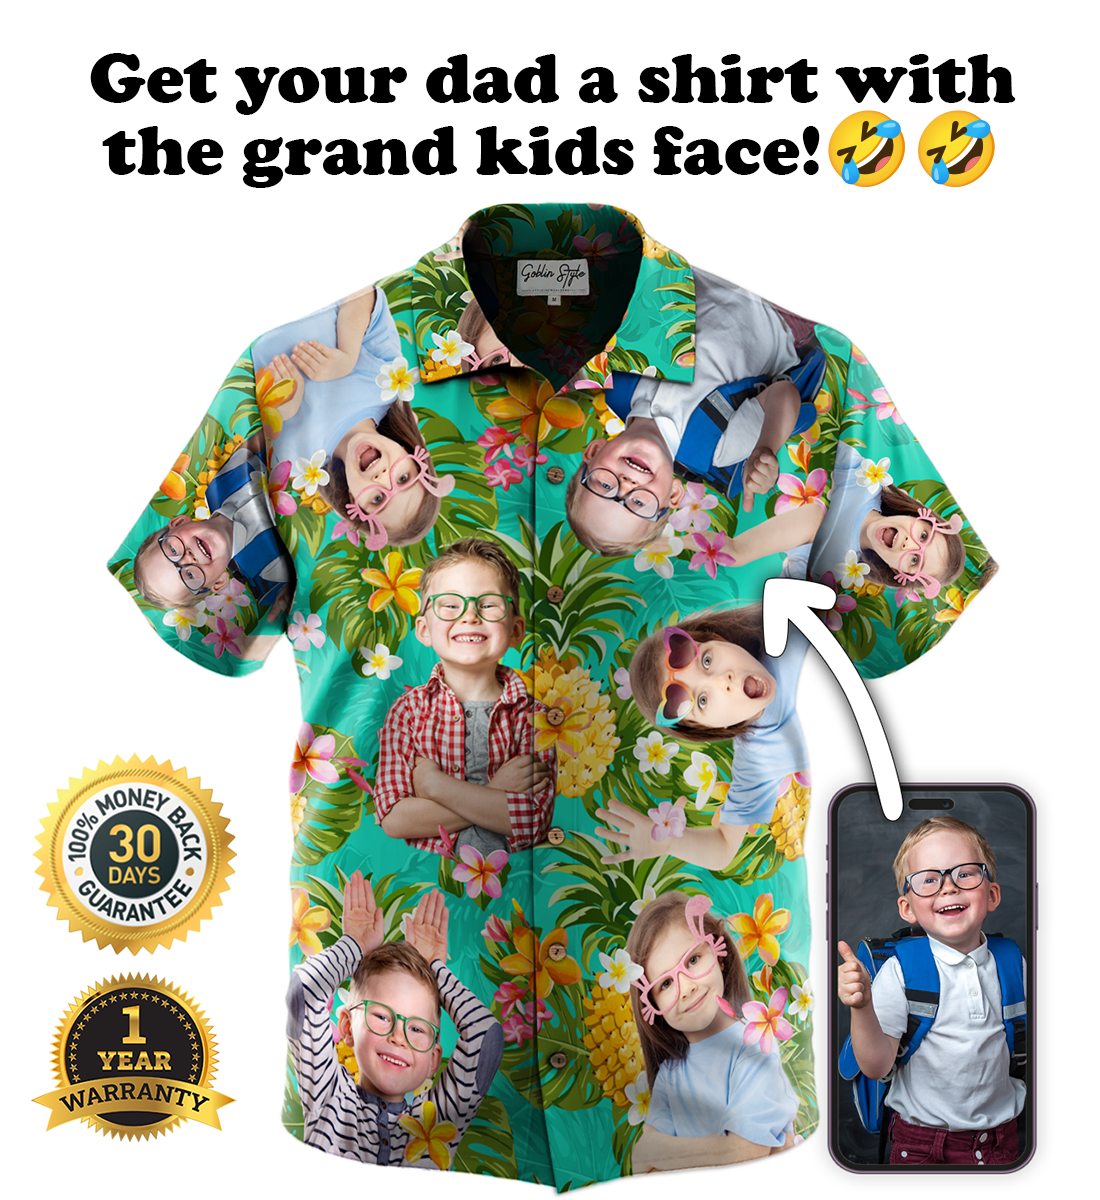 Father's Day is coming up. Get your dad a shirt with all of his grand kids face! Grab it today: goblinstyle.co/product/custom…
#fatherday #gift #giftfordad #grandpa